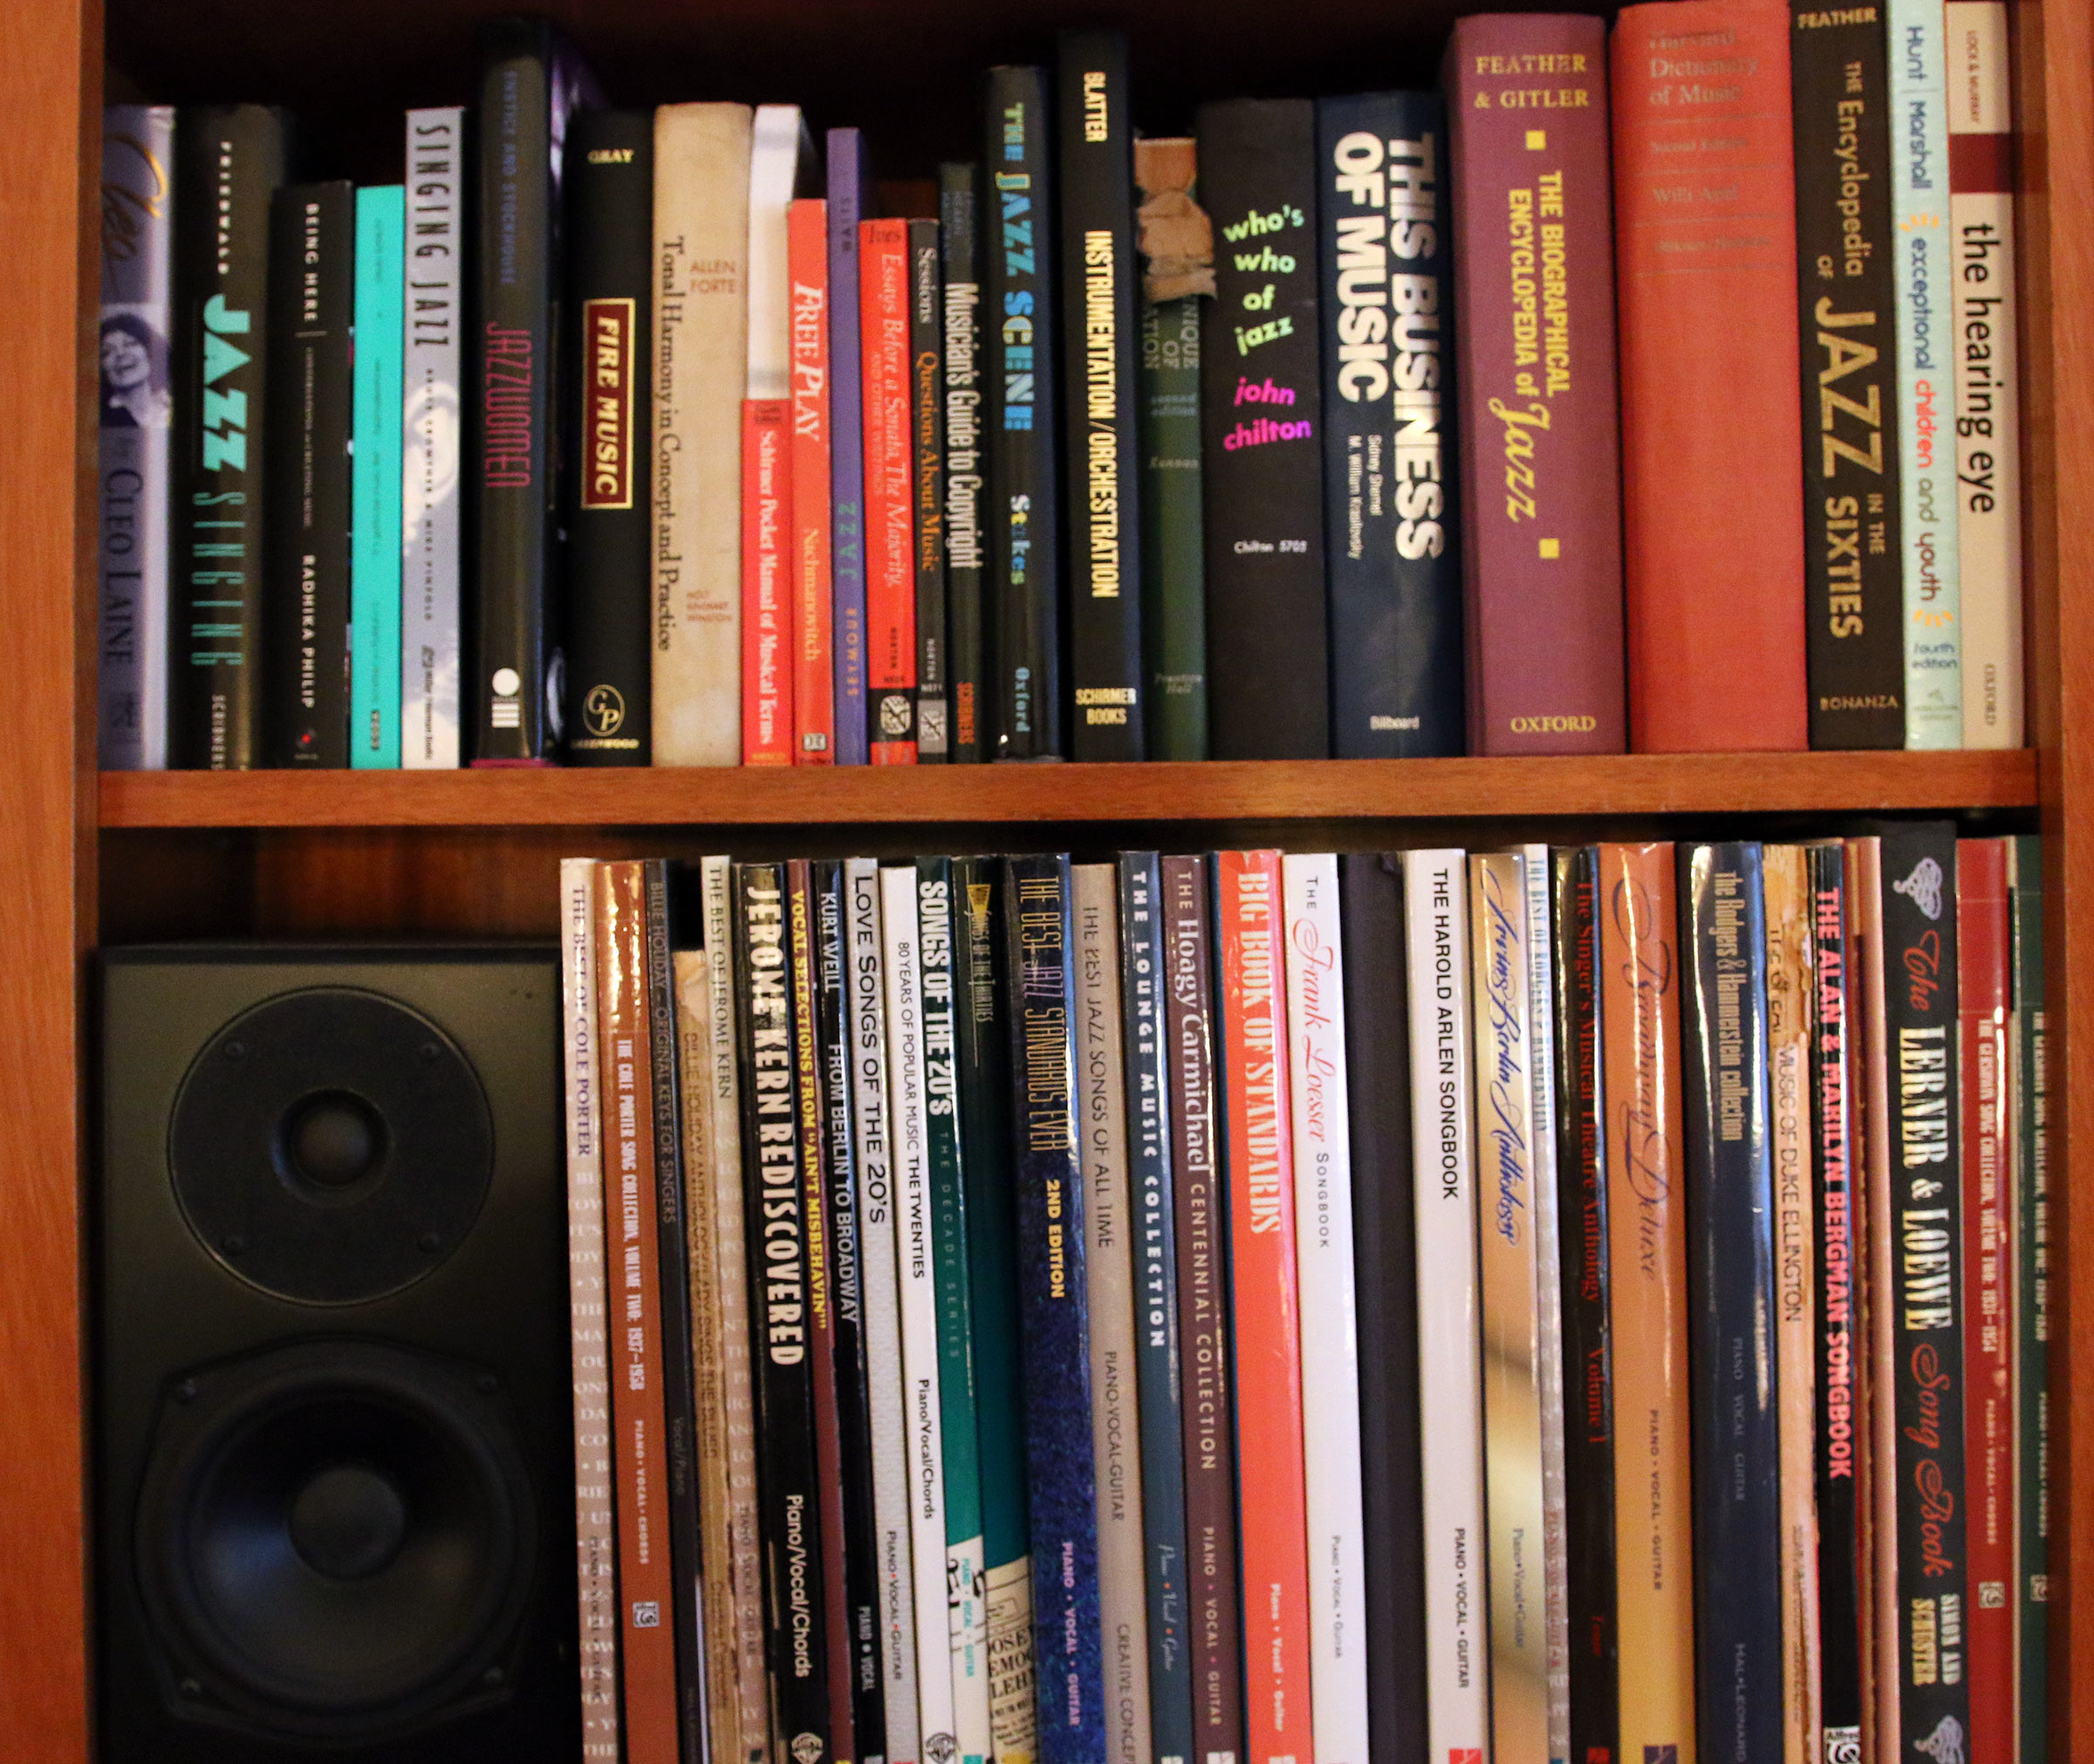 Two shelves in Jane Ira Bloom's living room reveal some of the sheet music and books that have been important to her.